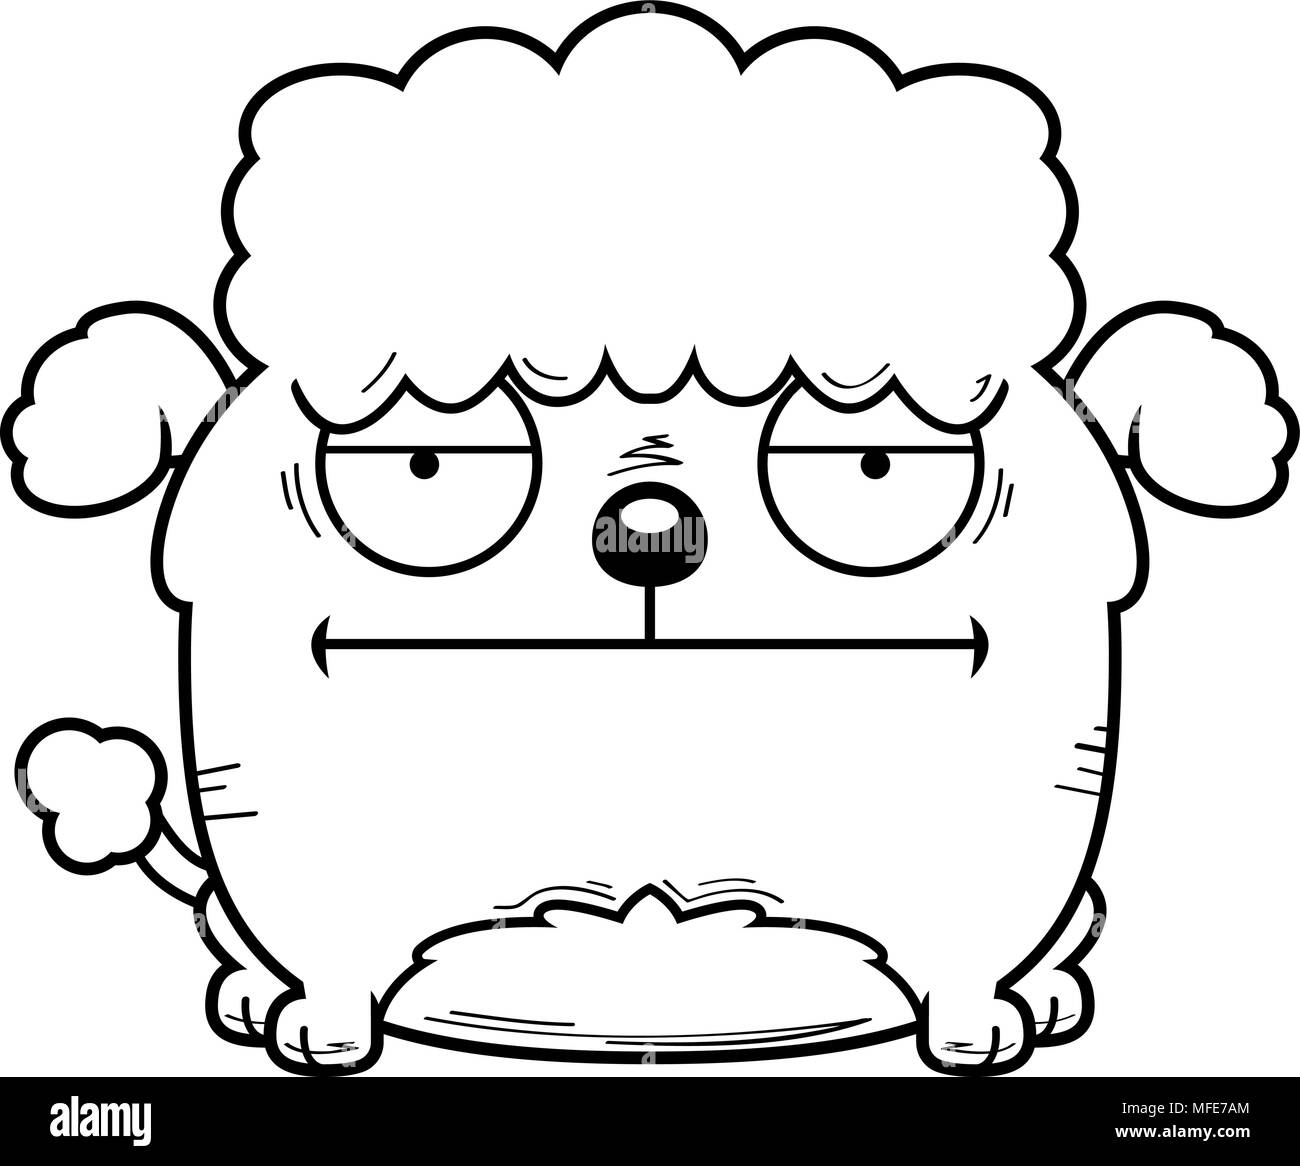 A cartoon illustration of a little poodle looking calm. Stock Vector